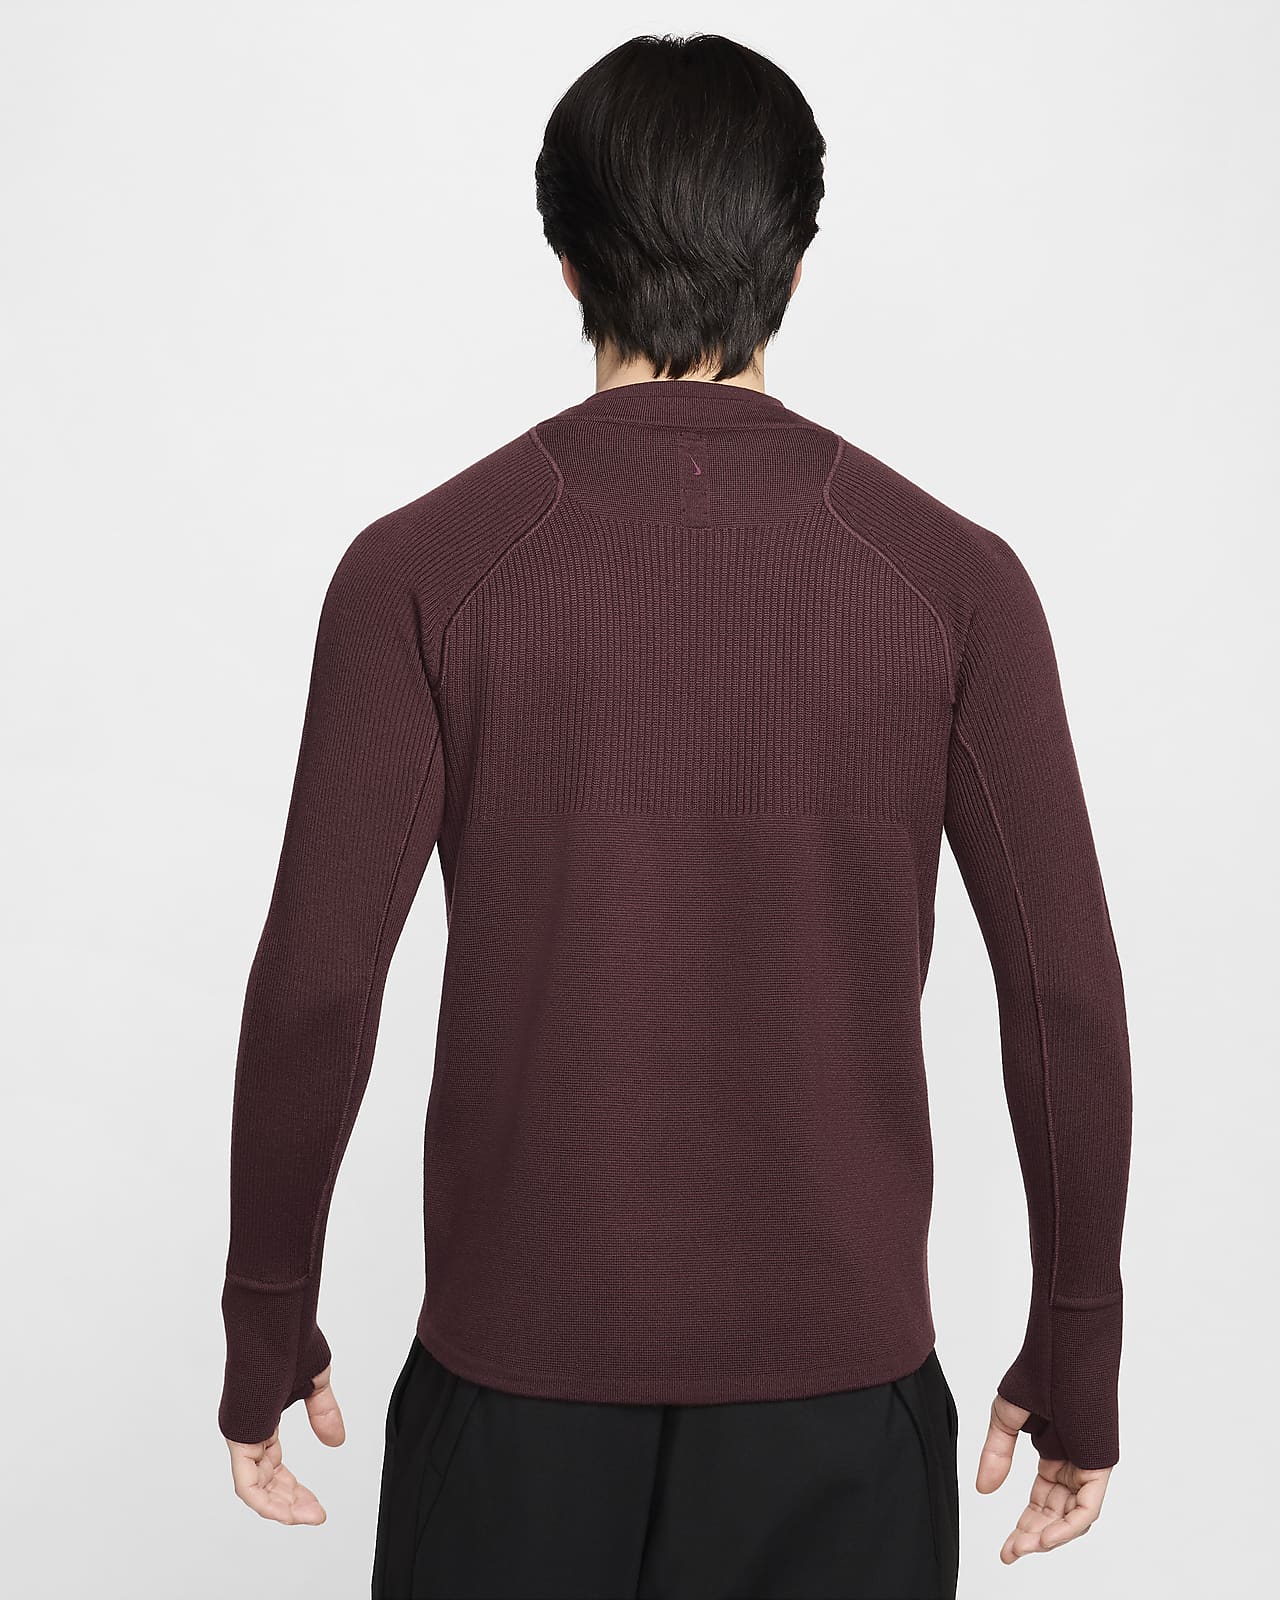 Nike Every Stitch Considered Men's Long-Sleeve Computational Knit Top